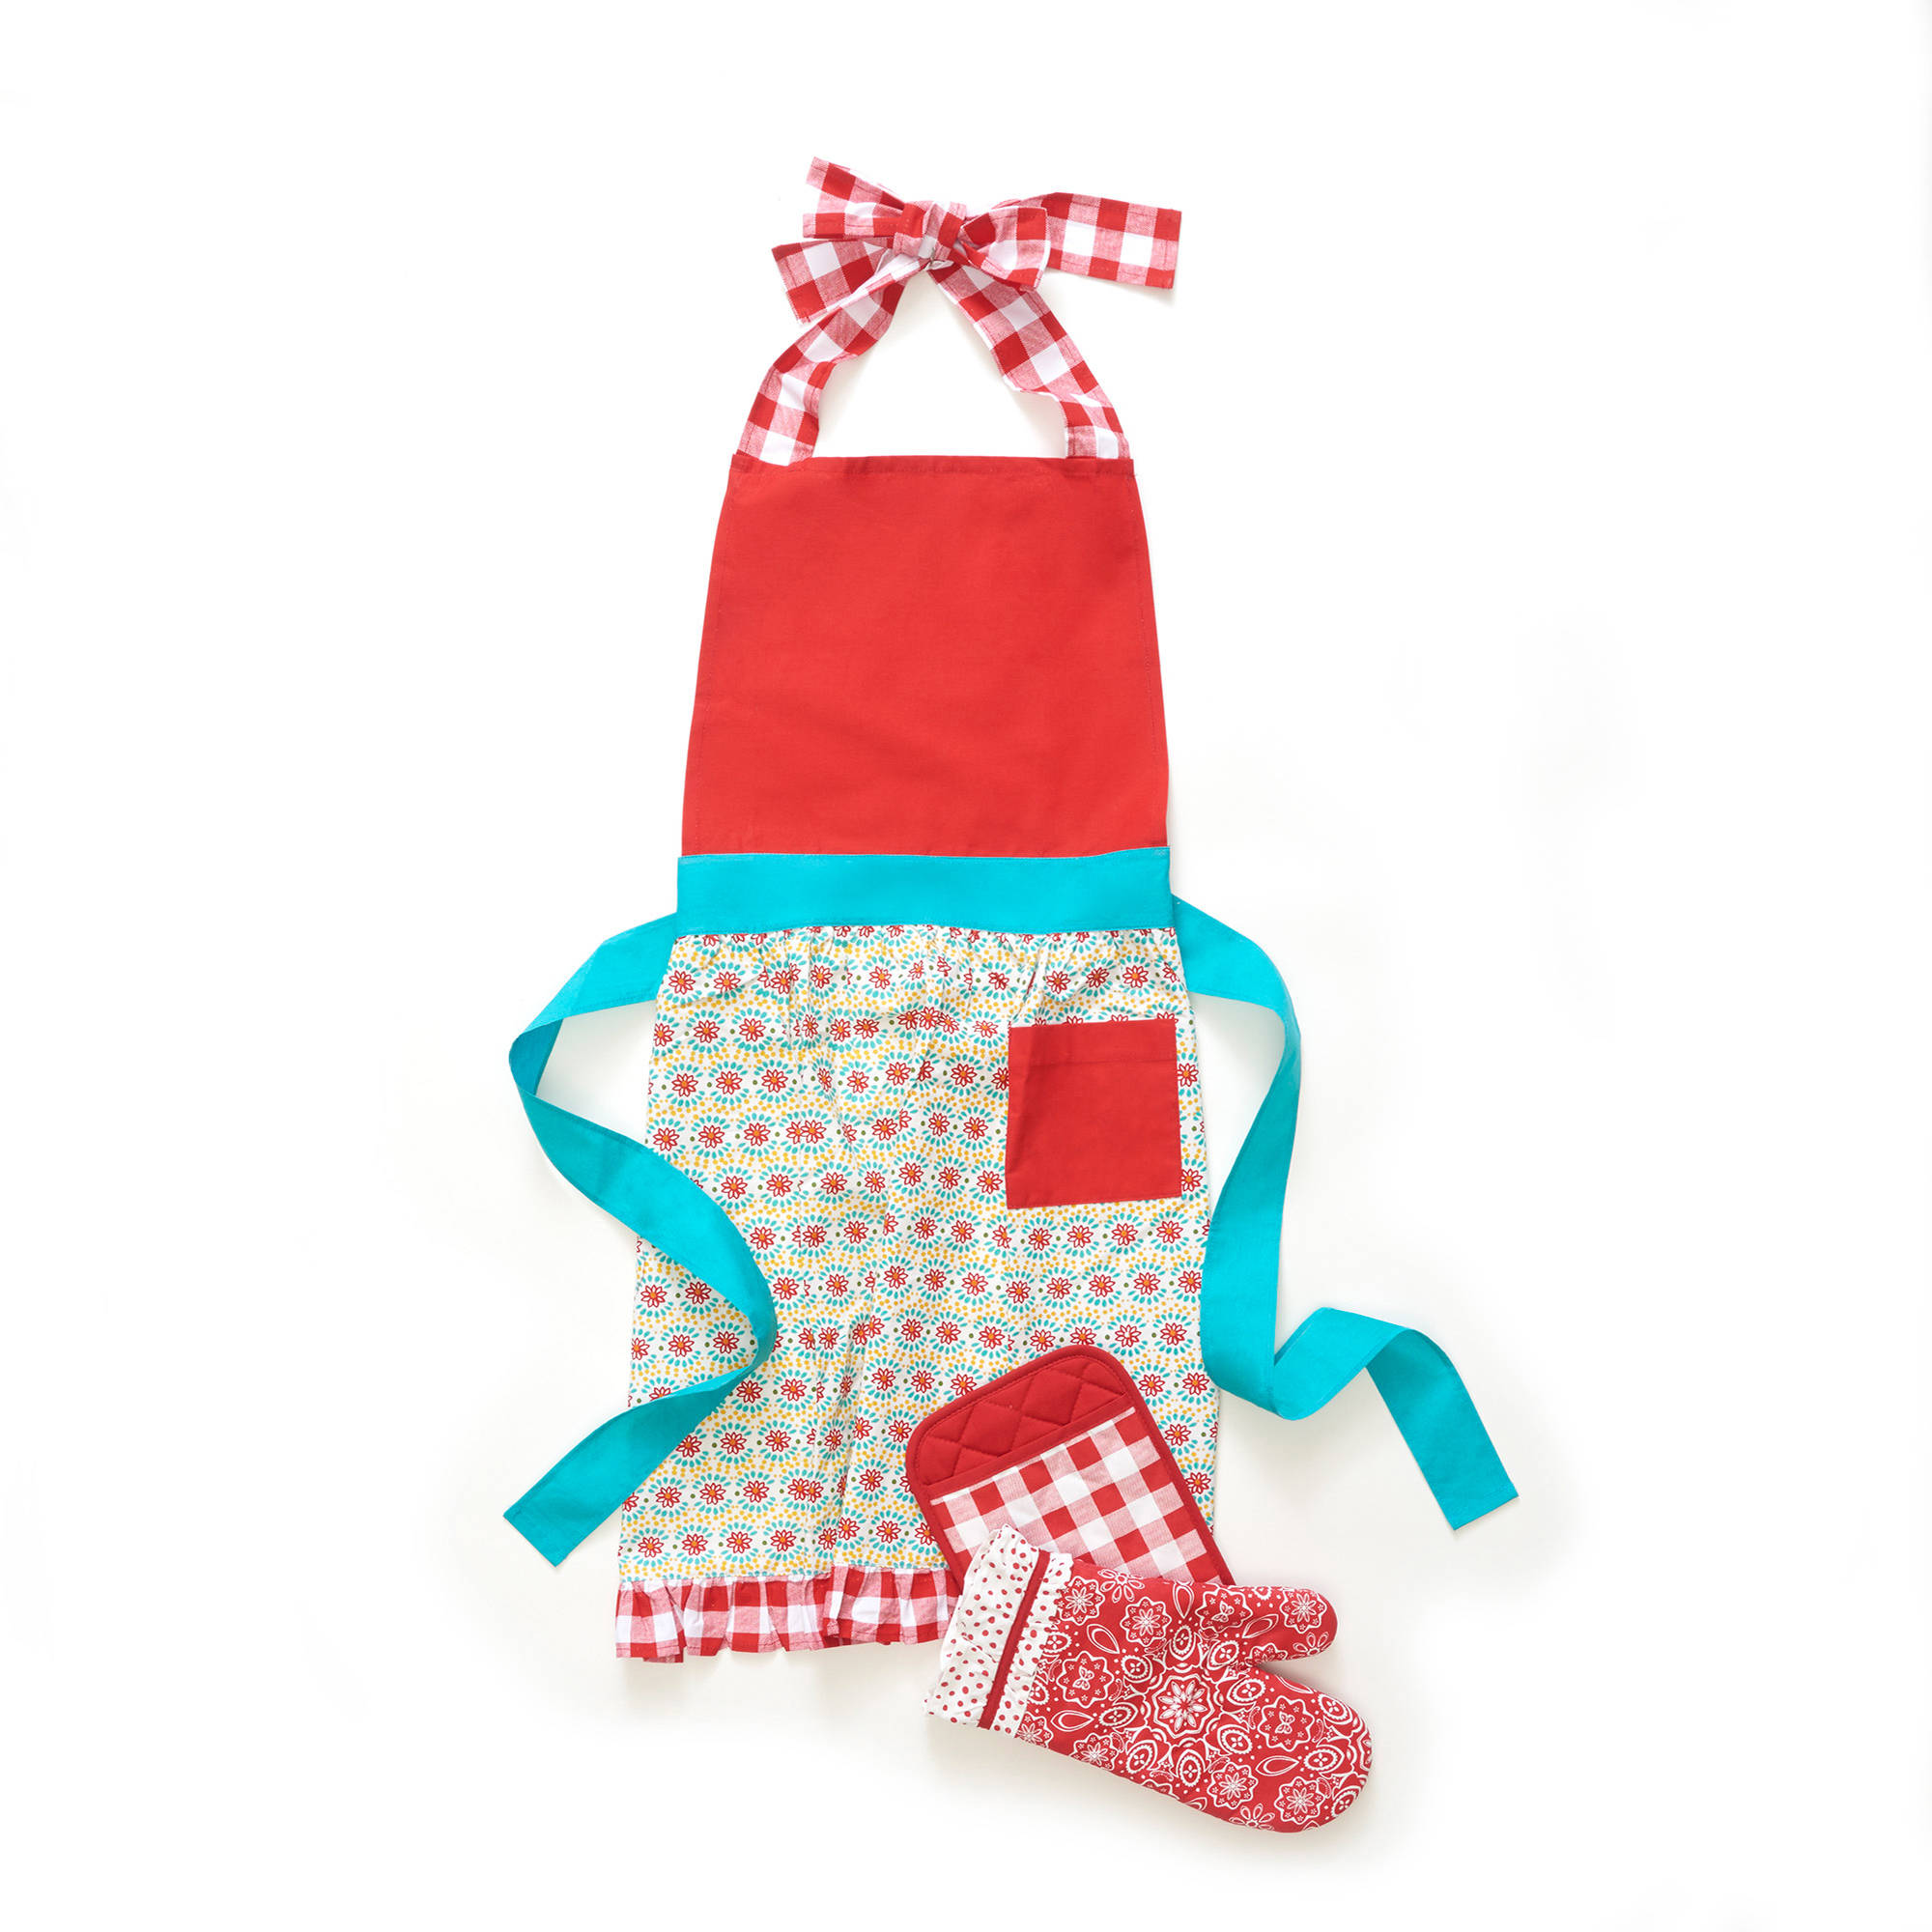 The Pioneer Woman Kitchen Set Just $14.97! Includes an Apron, Oven Mitt & Pot Holder!